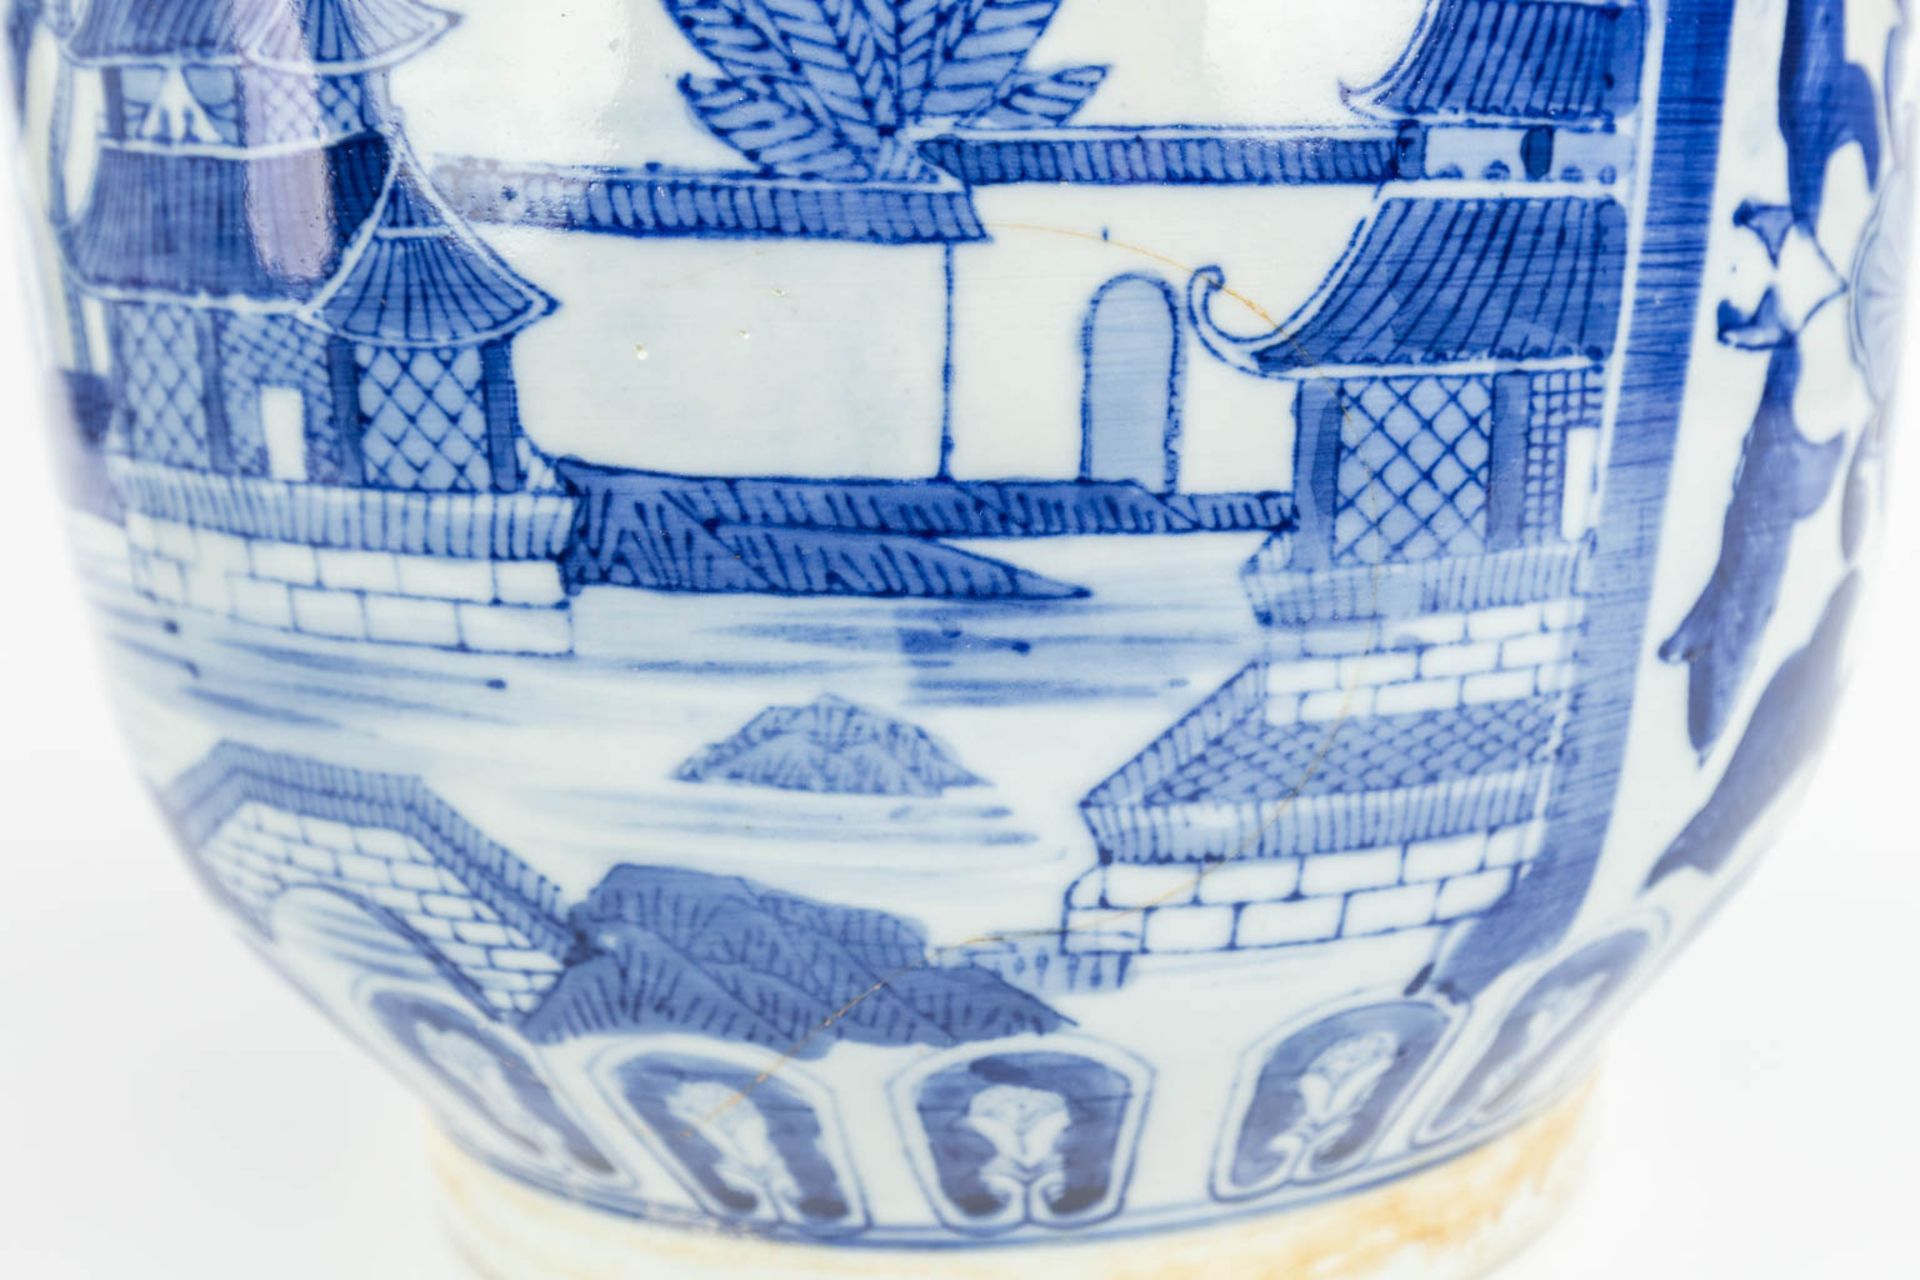 A set of 2 Chinese cache-pots made of porcelain of which 1 has a blue-white decor and the other a de - Image 10 of 15